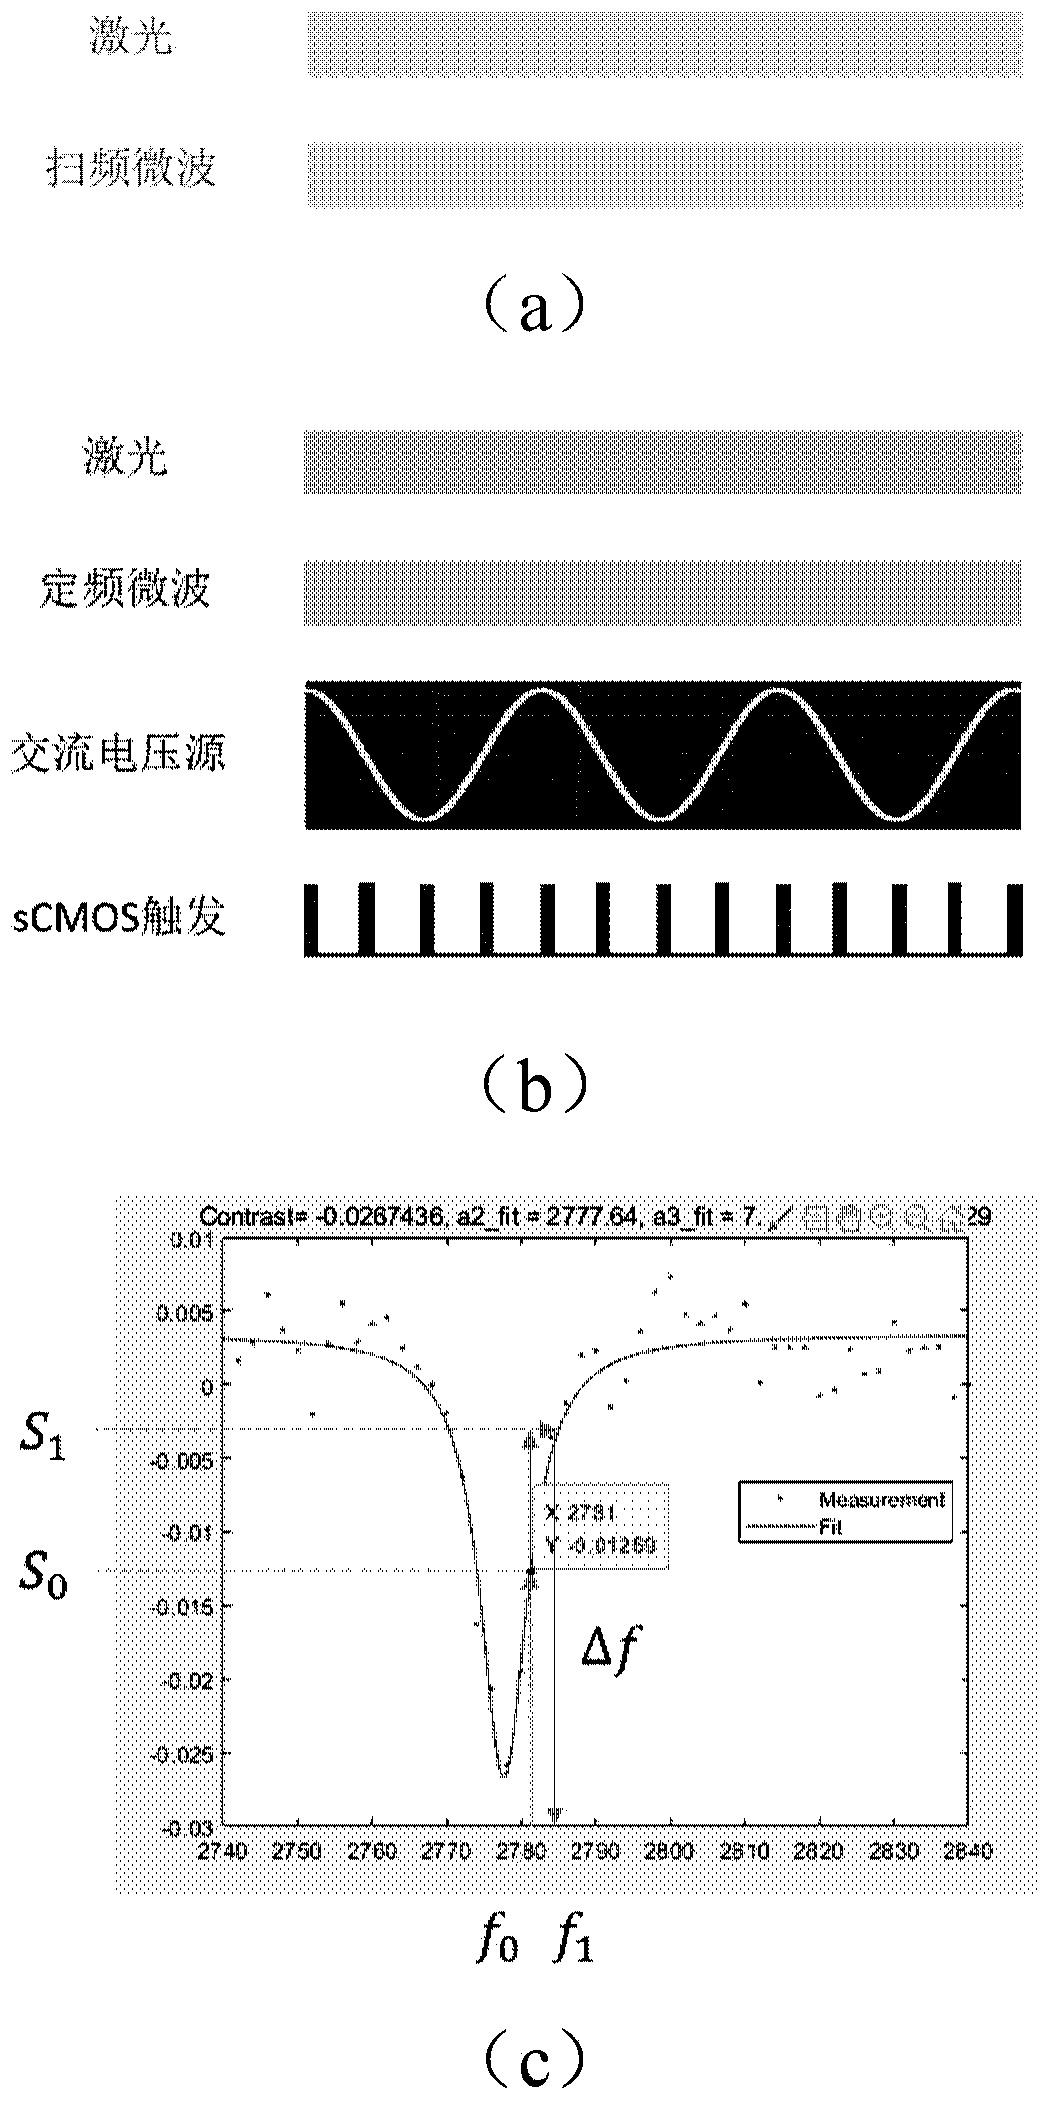 Microcosmic electrical impedance imaging device and method based on diamond NV color center